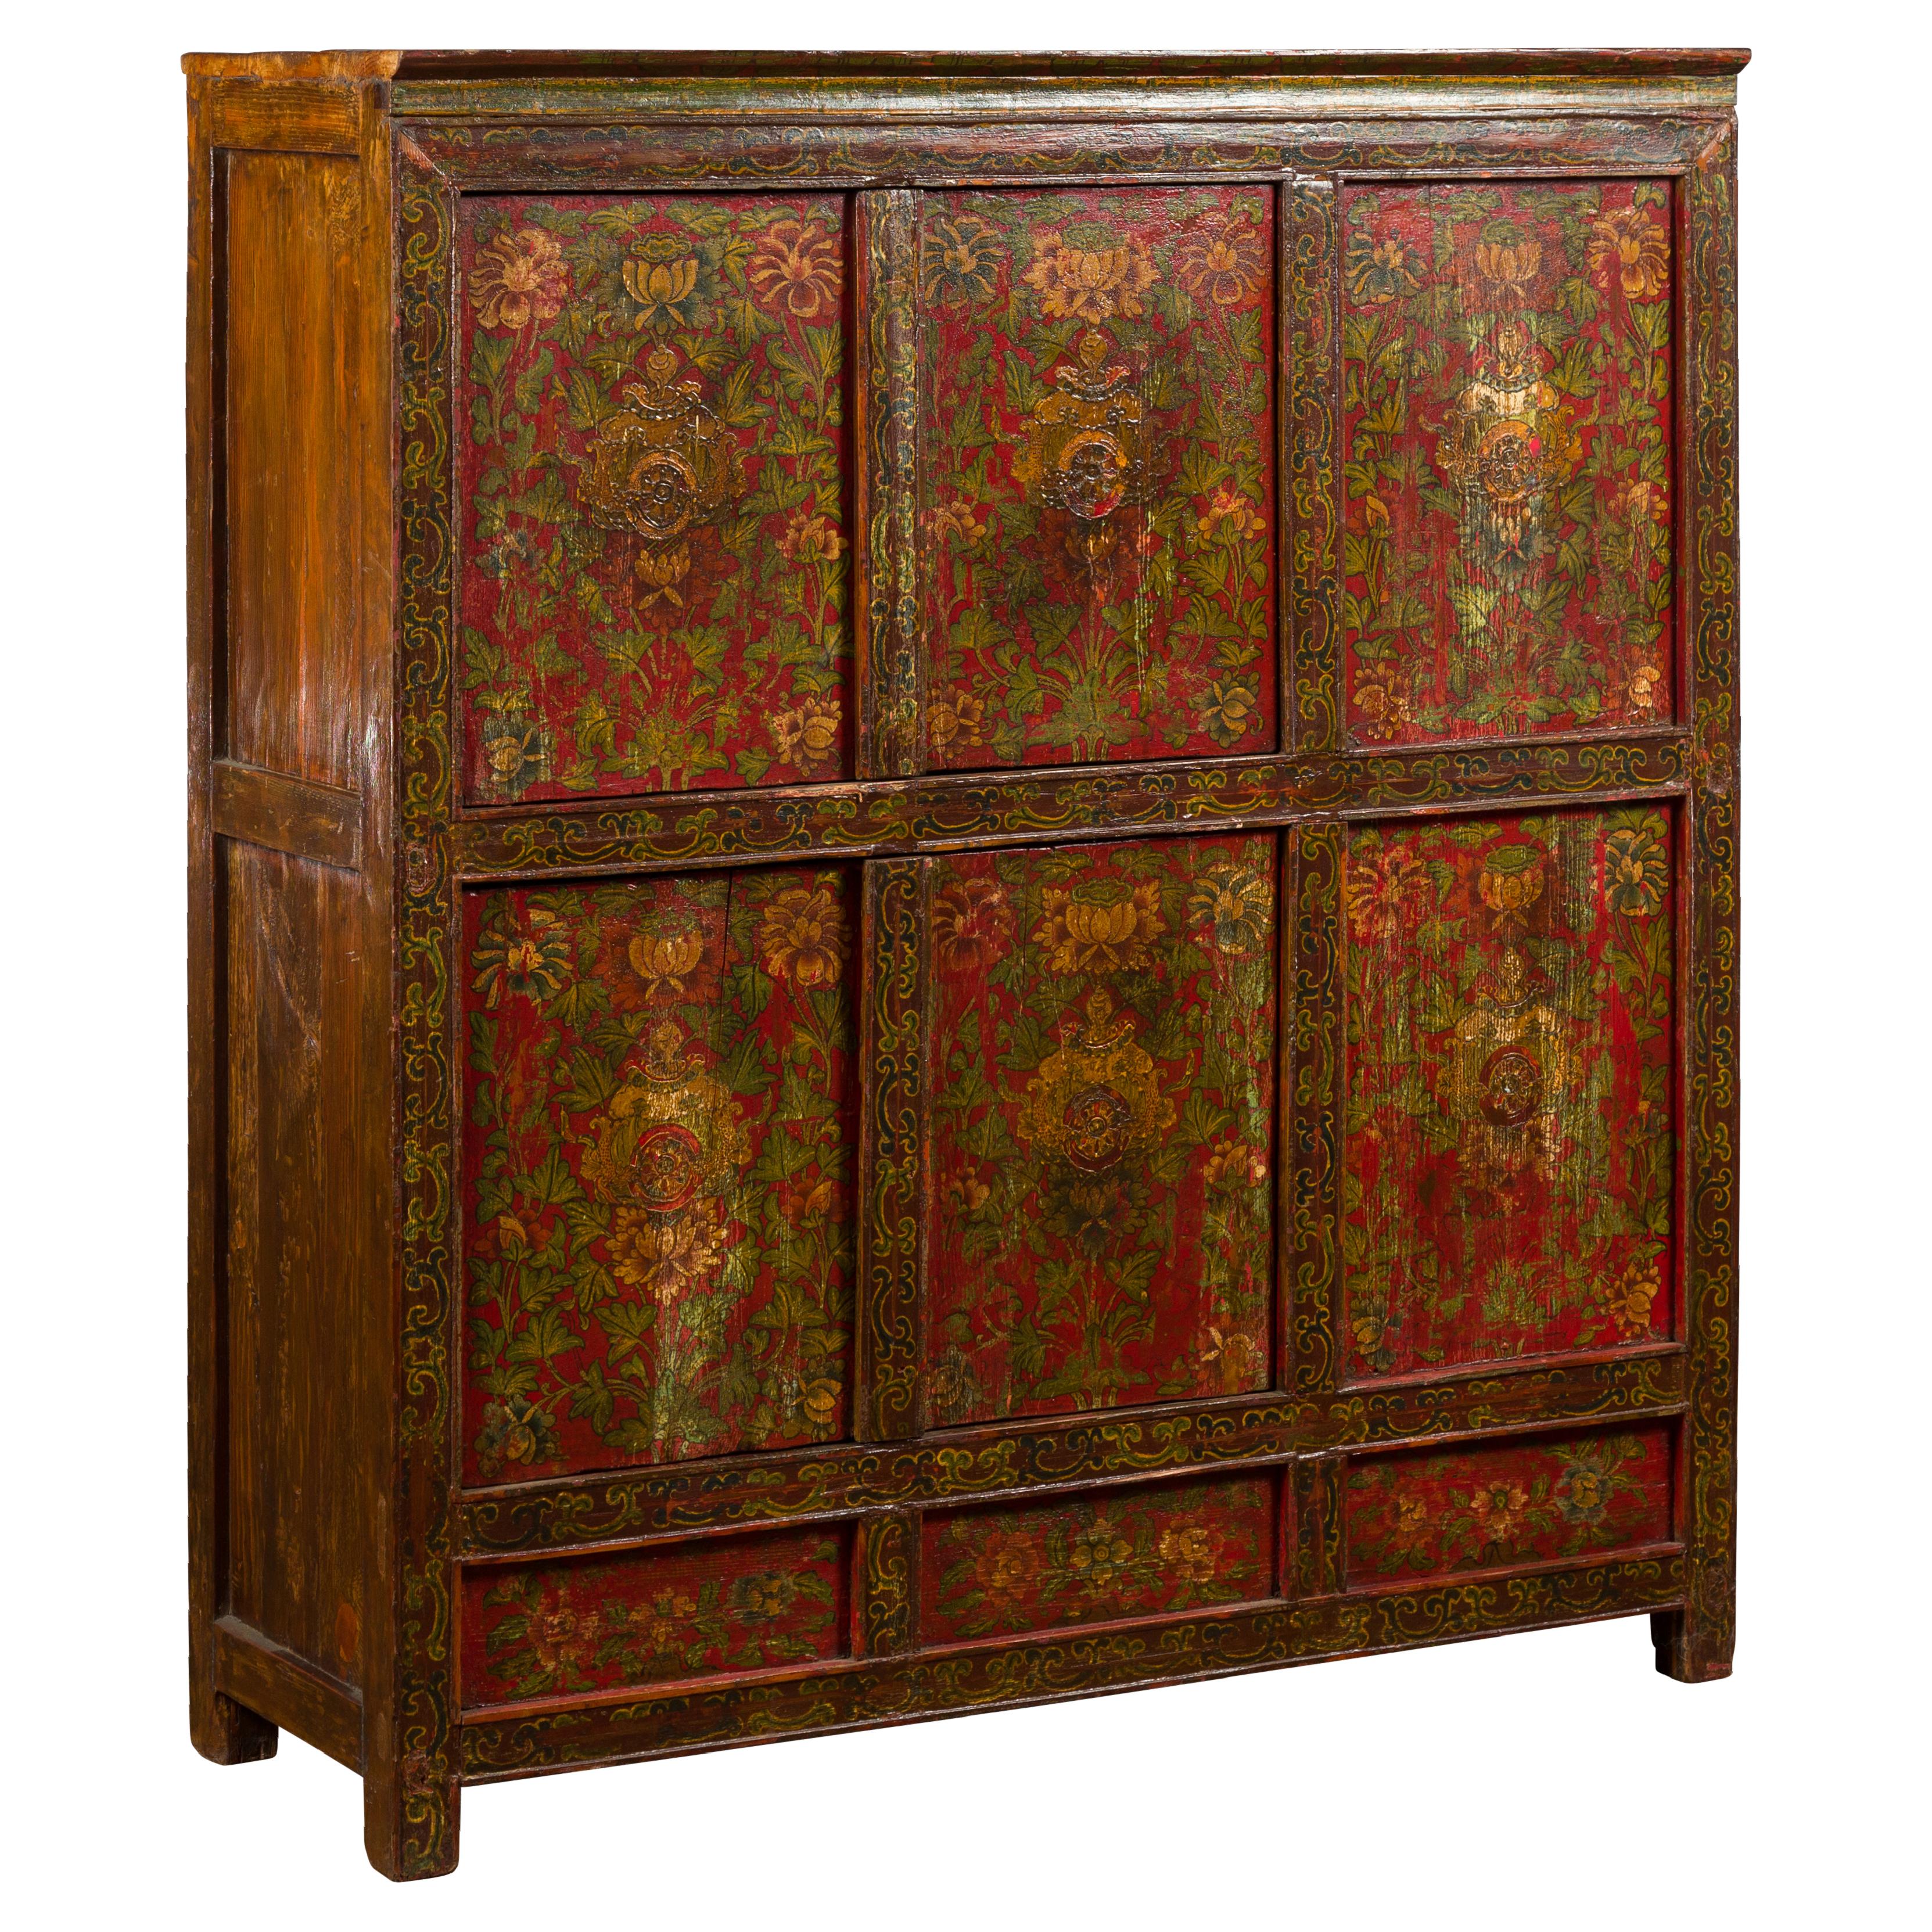 A Tibetan hand-painted cabinet from the 19th century, with two pairs of doors and floral motifs. Created in Tibet during the 19th century, this cabinet captures our attention with its clean lines and abundant hand-painted yellow and green floral